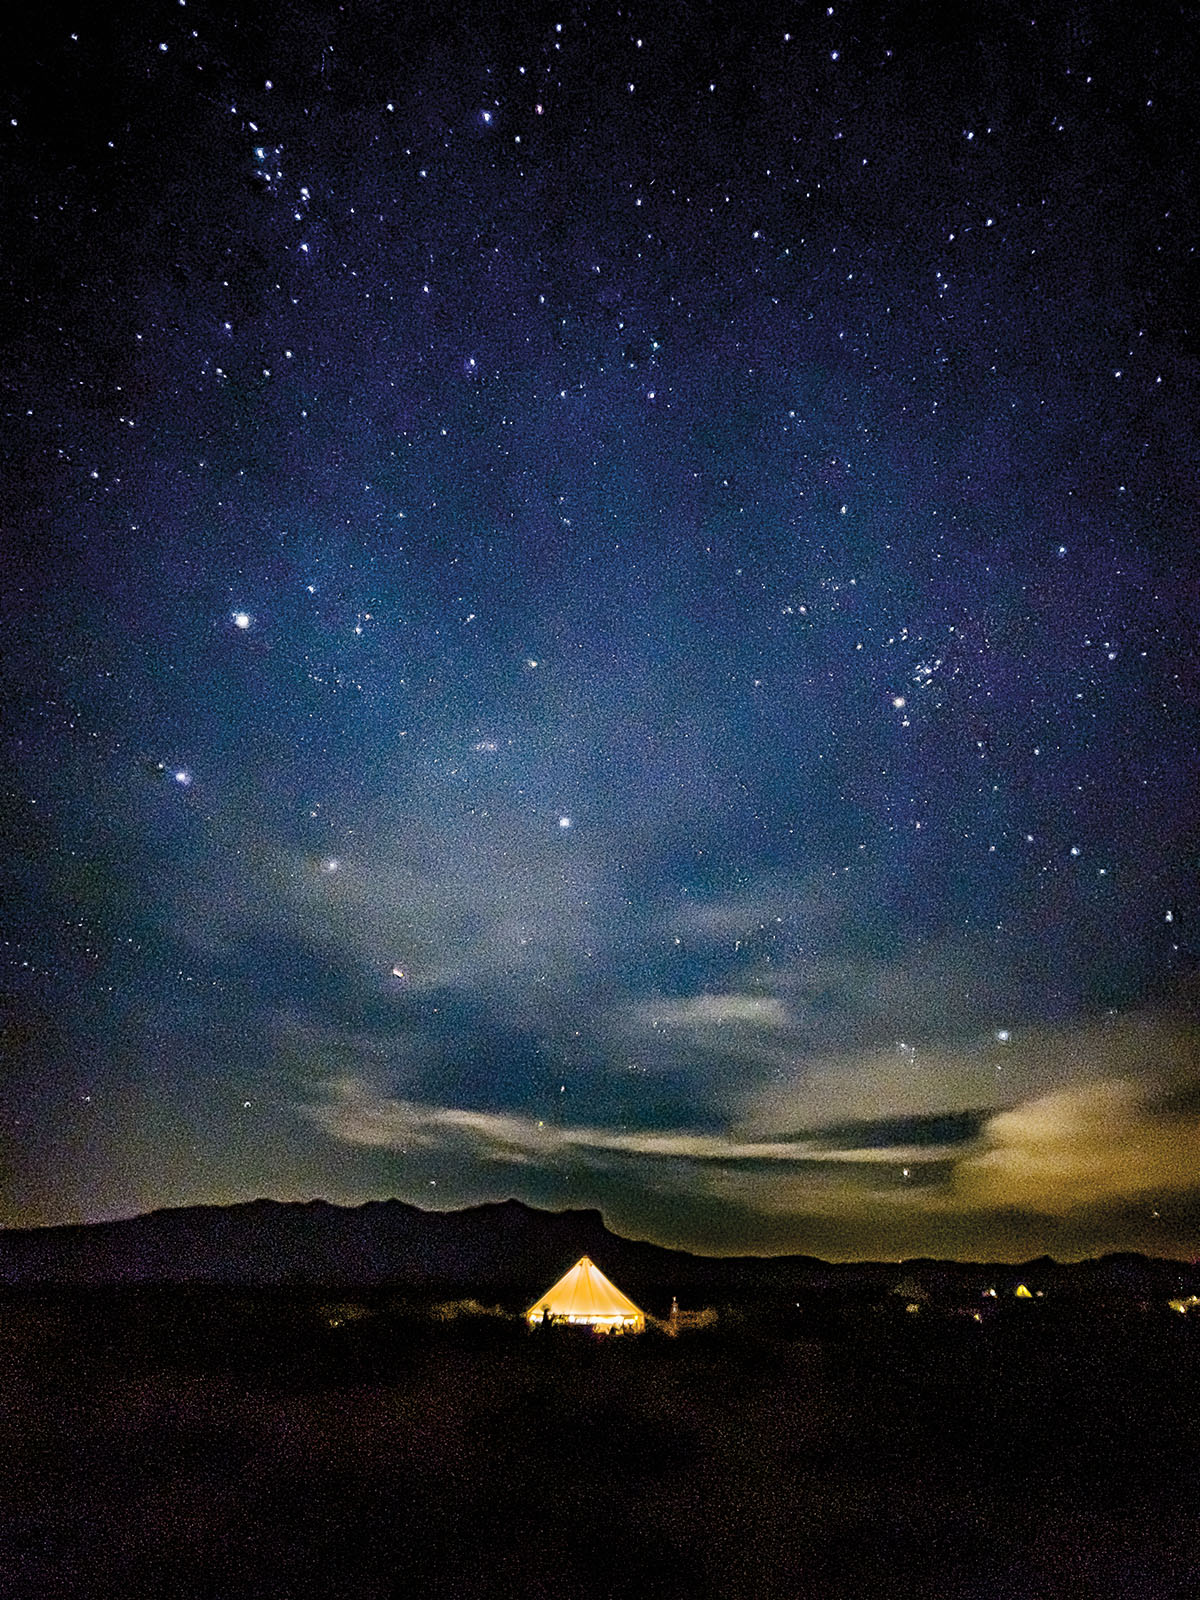 A lit-up yellow tent under a large, deep-blue starry night sky